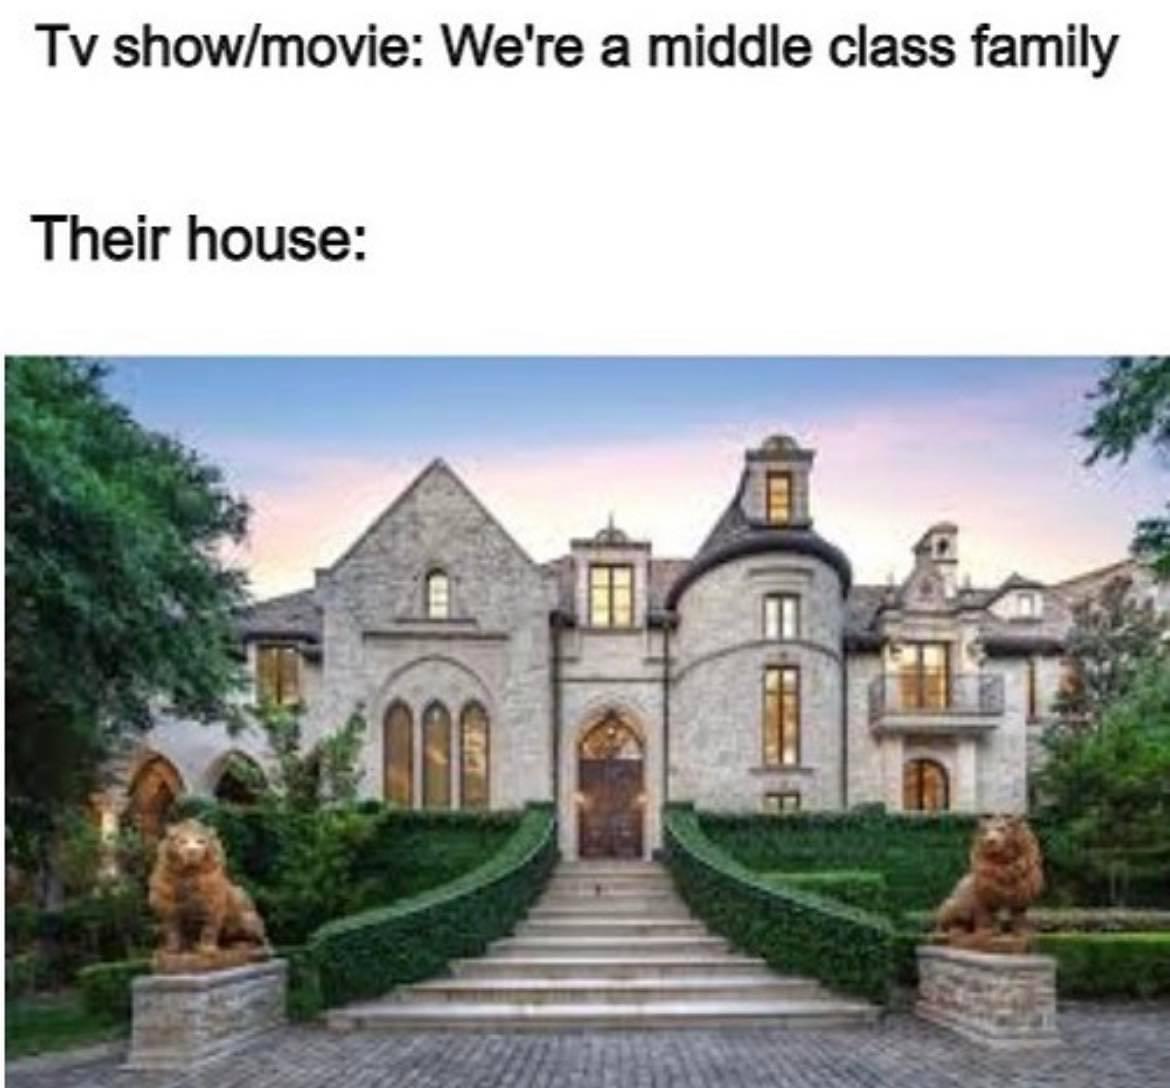 Truth Memes - Tv showmovie We're a middle class family Their house